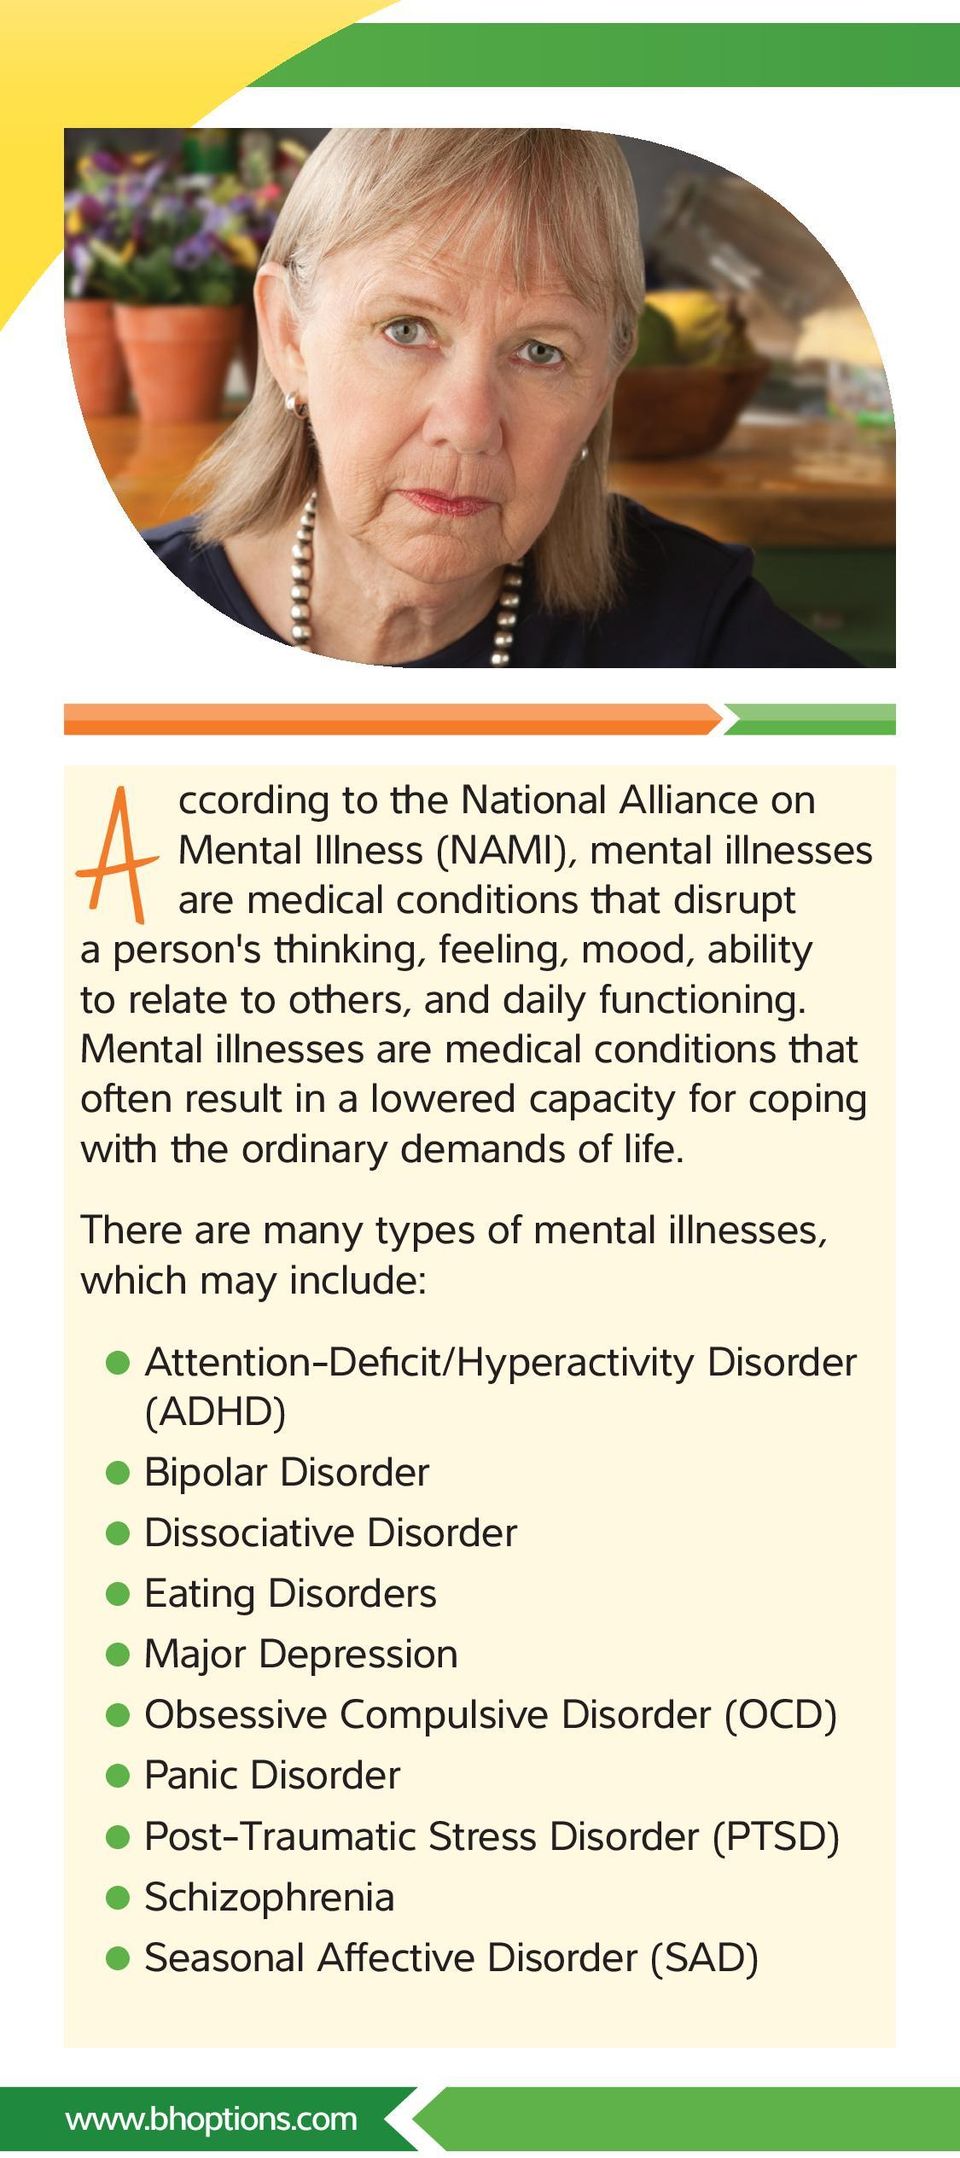 There are many types of mental illnesses, which may include: Attention-Deficit/Hyperactivity Disorder (ADHD) Bipolar Disorder Dissociative Disorder Eating Disorders